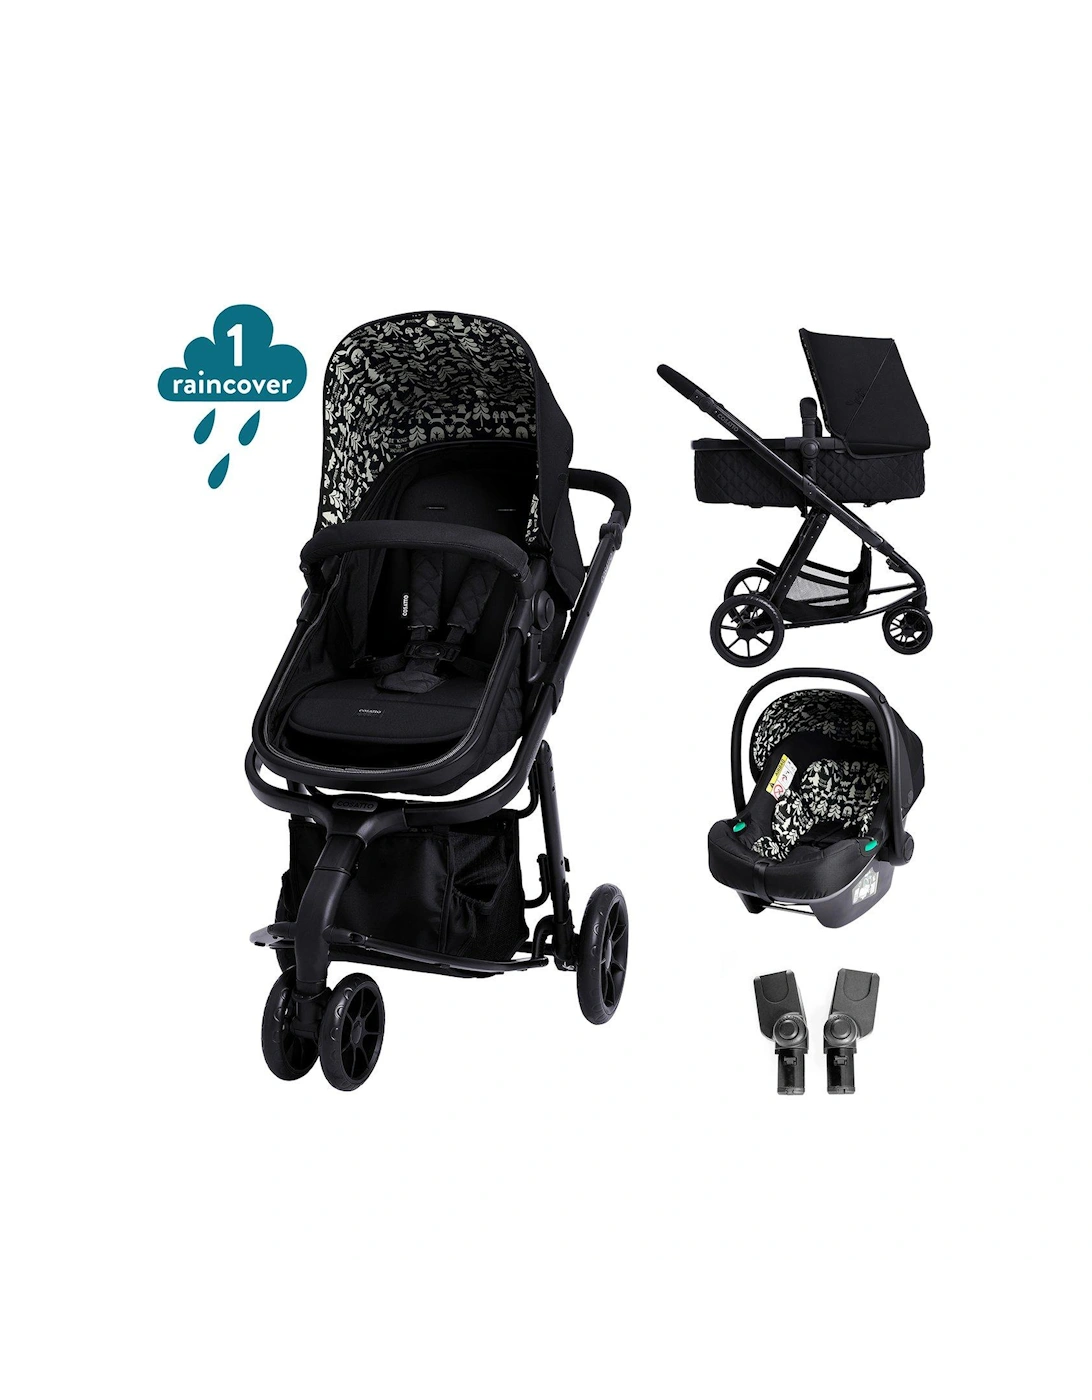 Giggle 2 in 1 Travel System Bundle Silhouette, 2 of 1